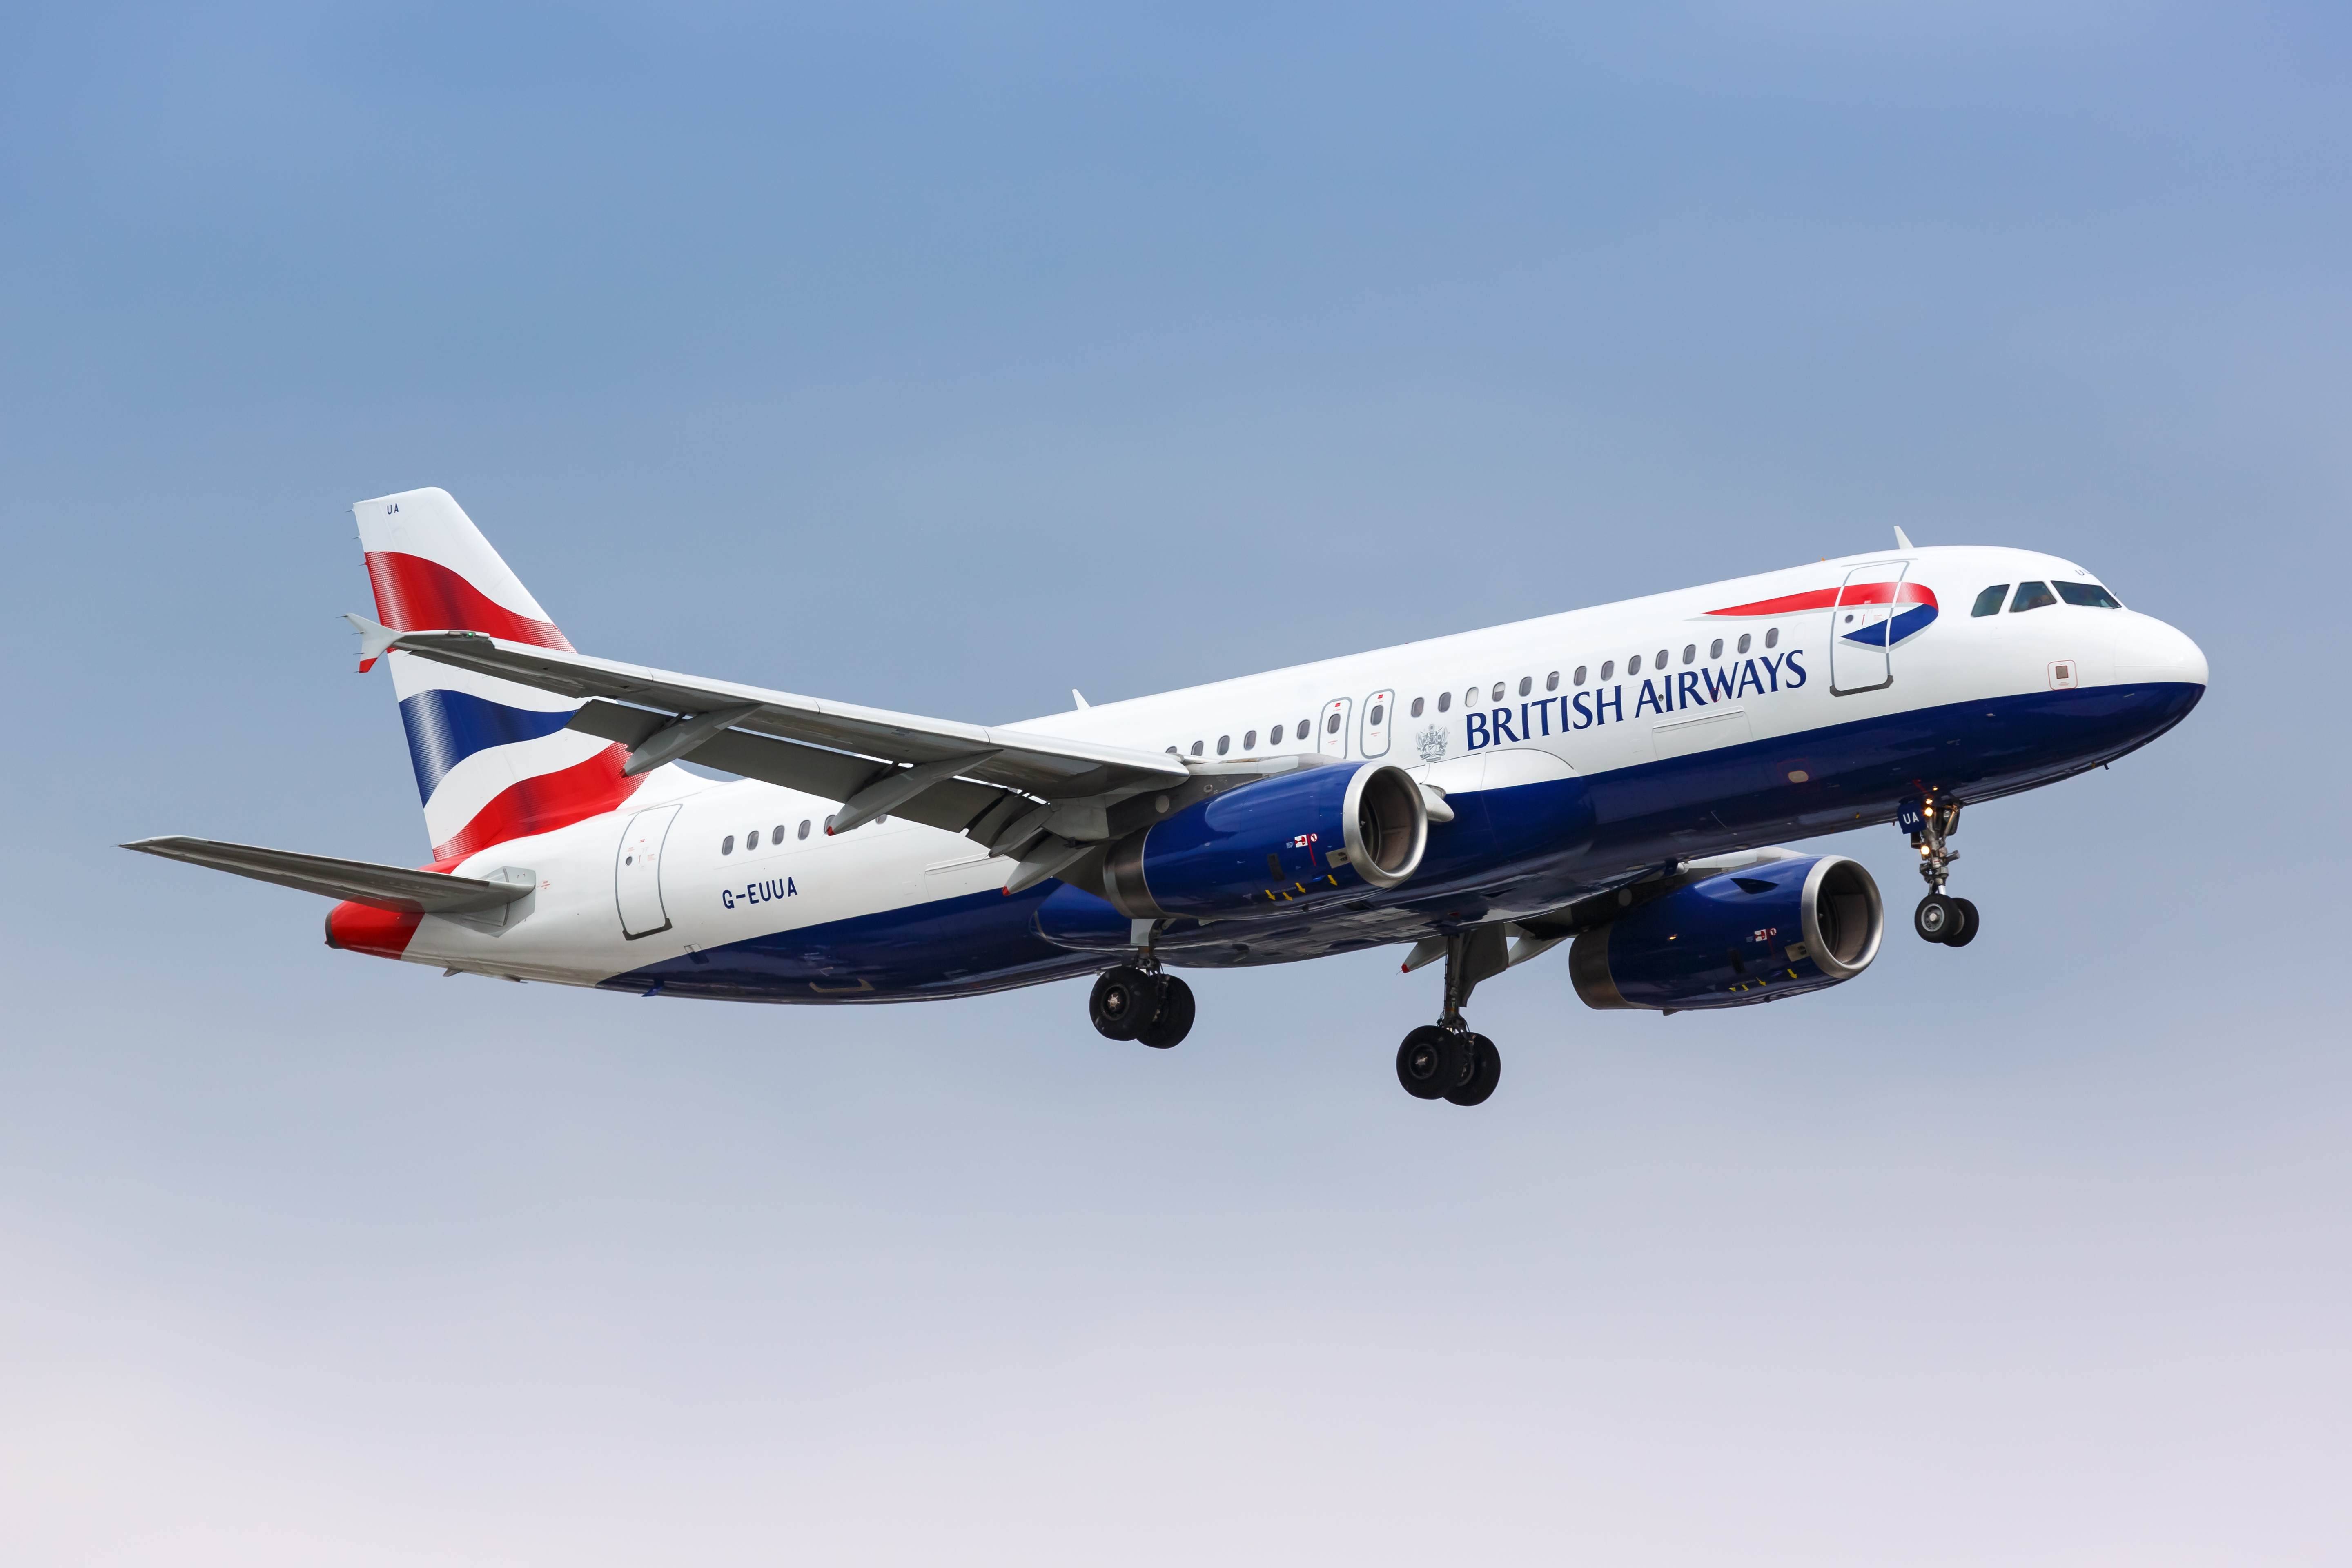 British Airways is to fund the £100,000 cost of pilot training for 60 wannabes a year